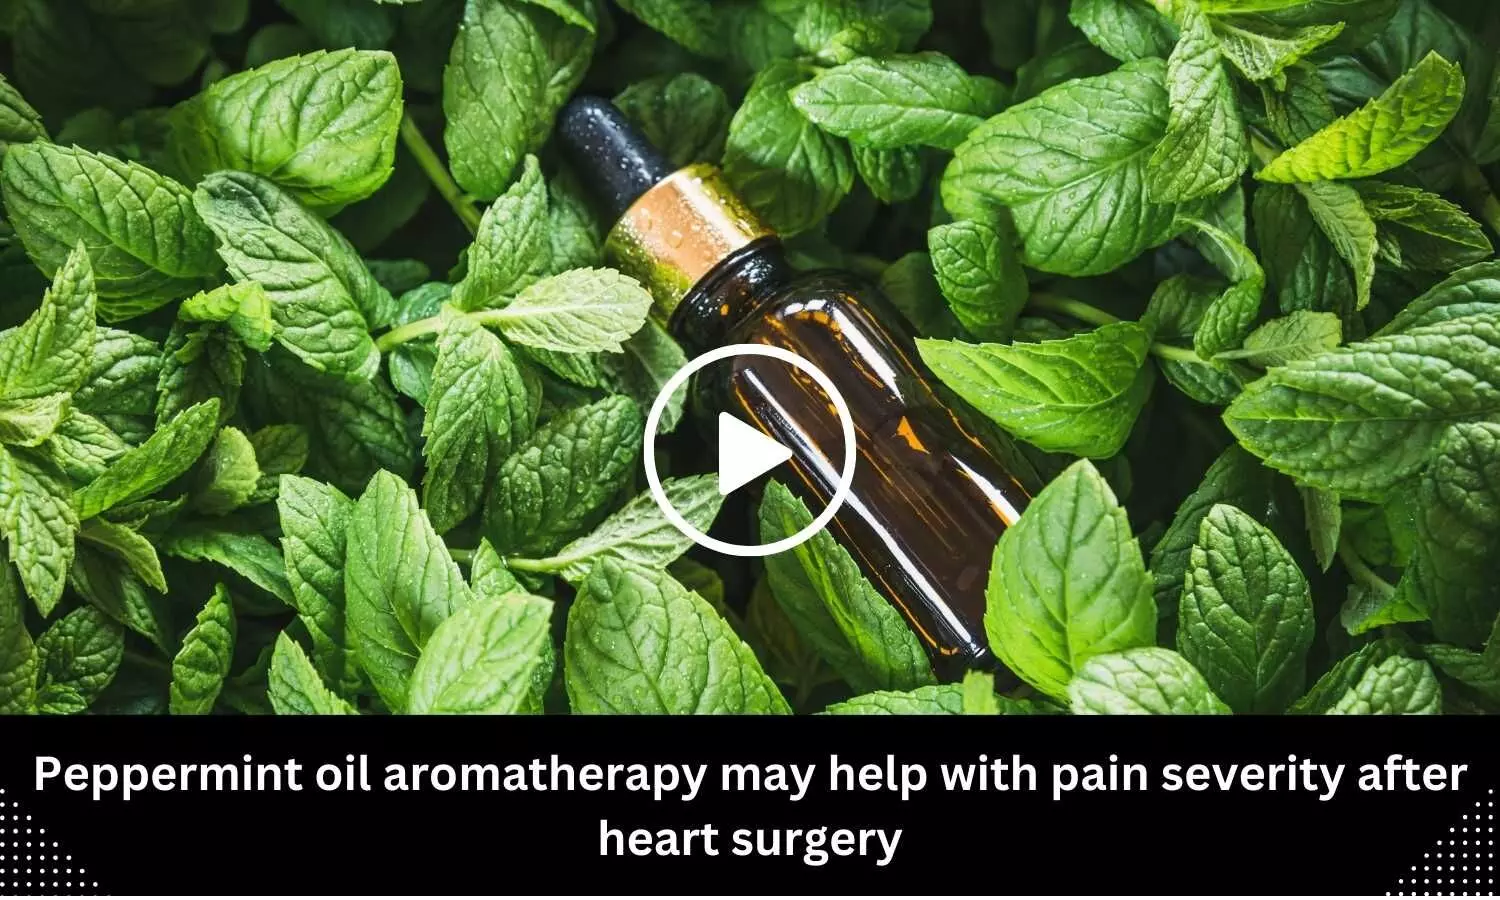 Peppermint oil aromatherapy may help with pain severity after heart surgery